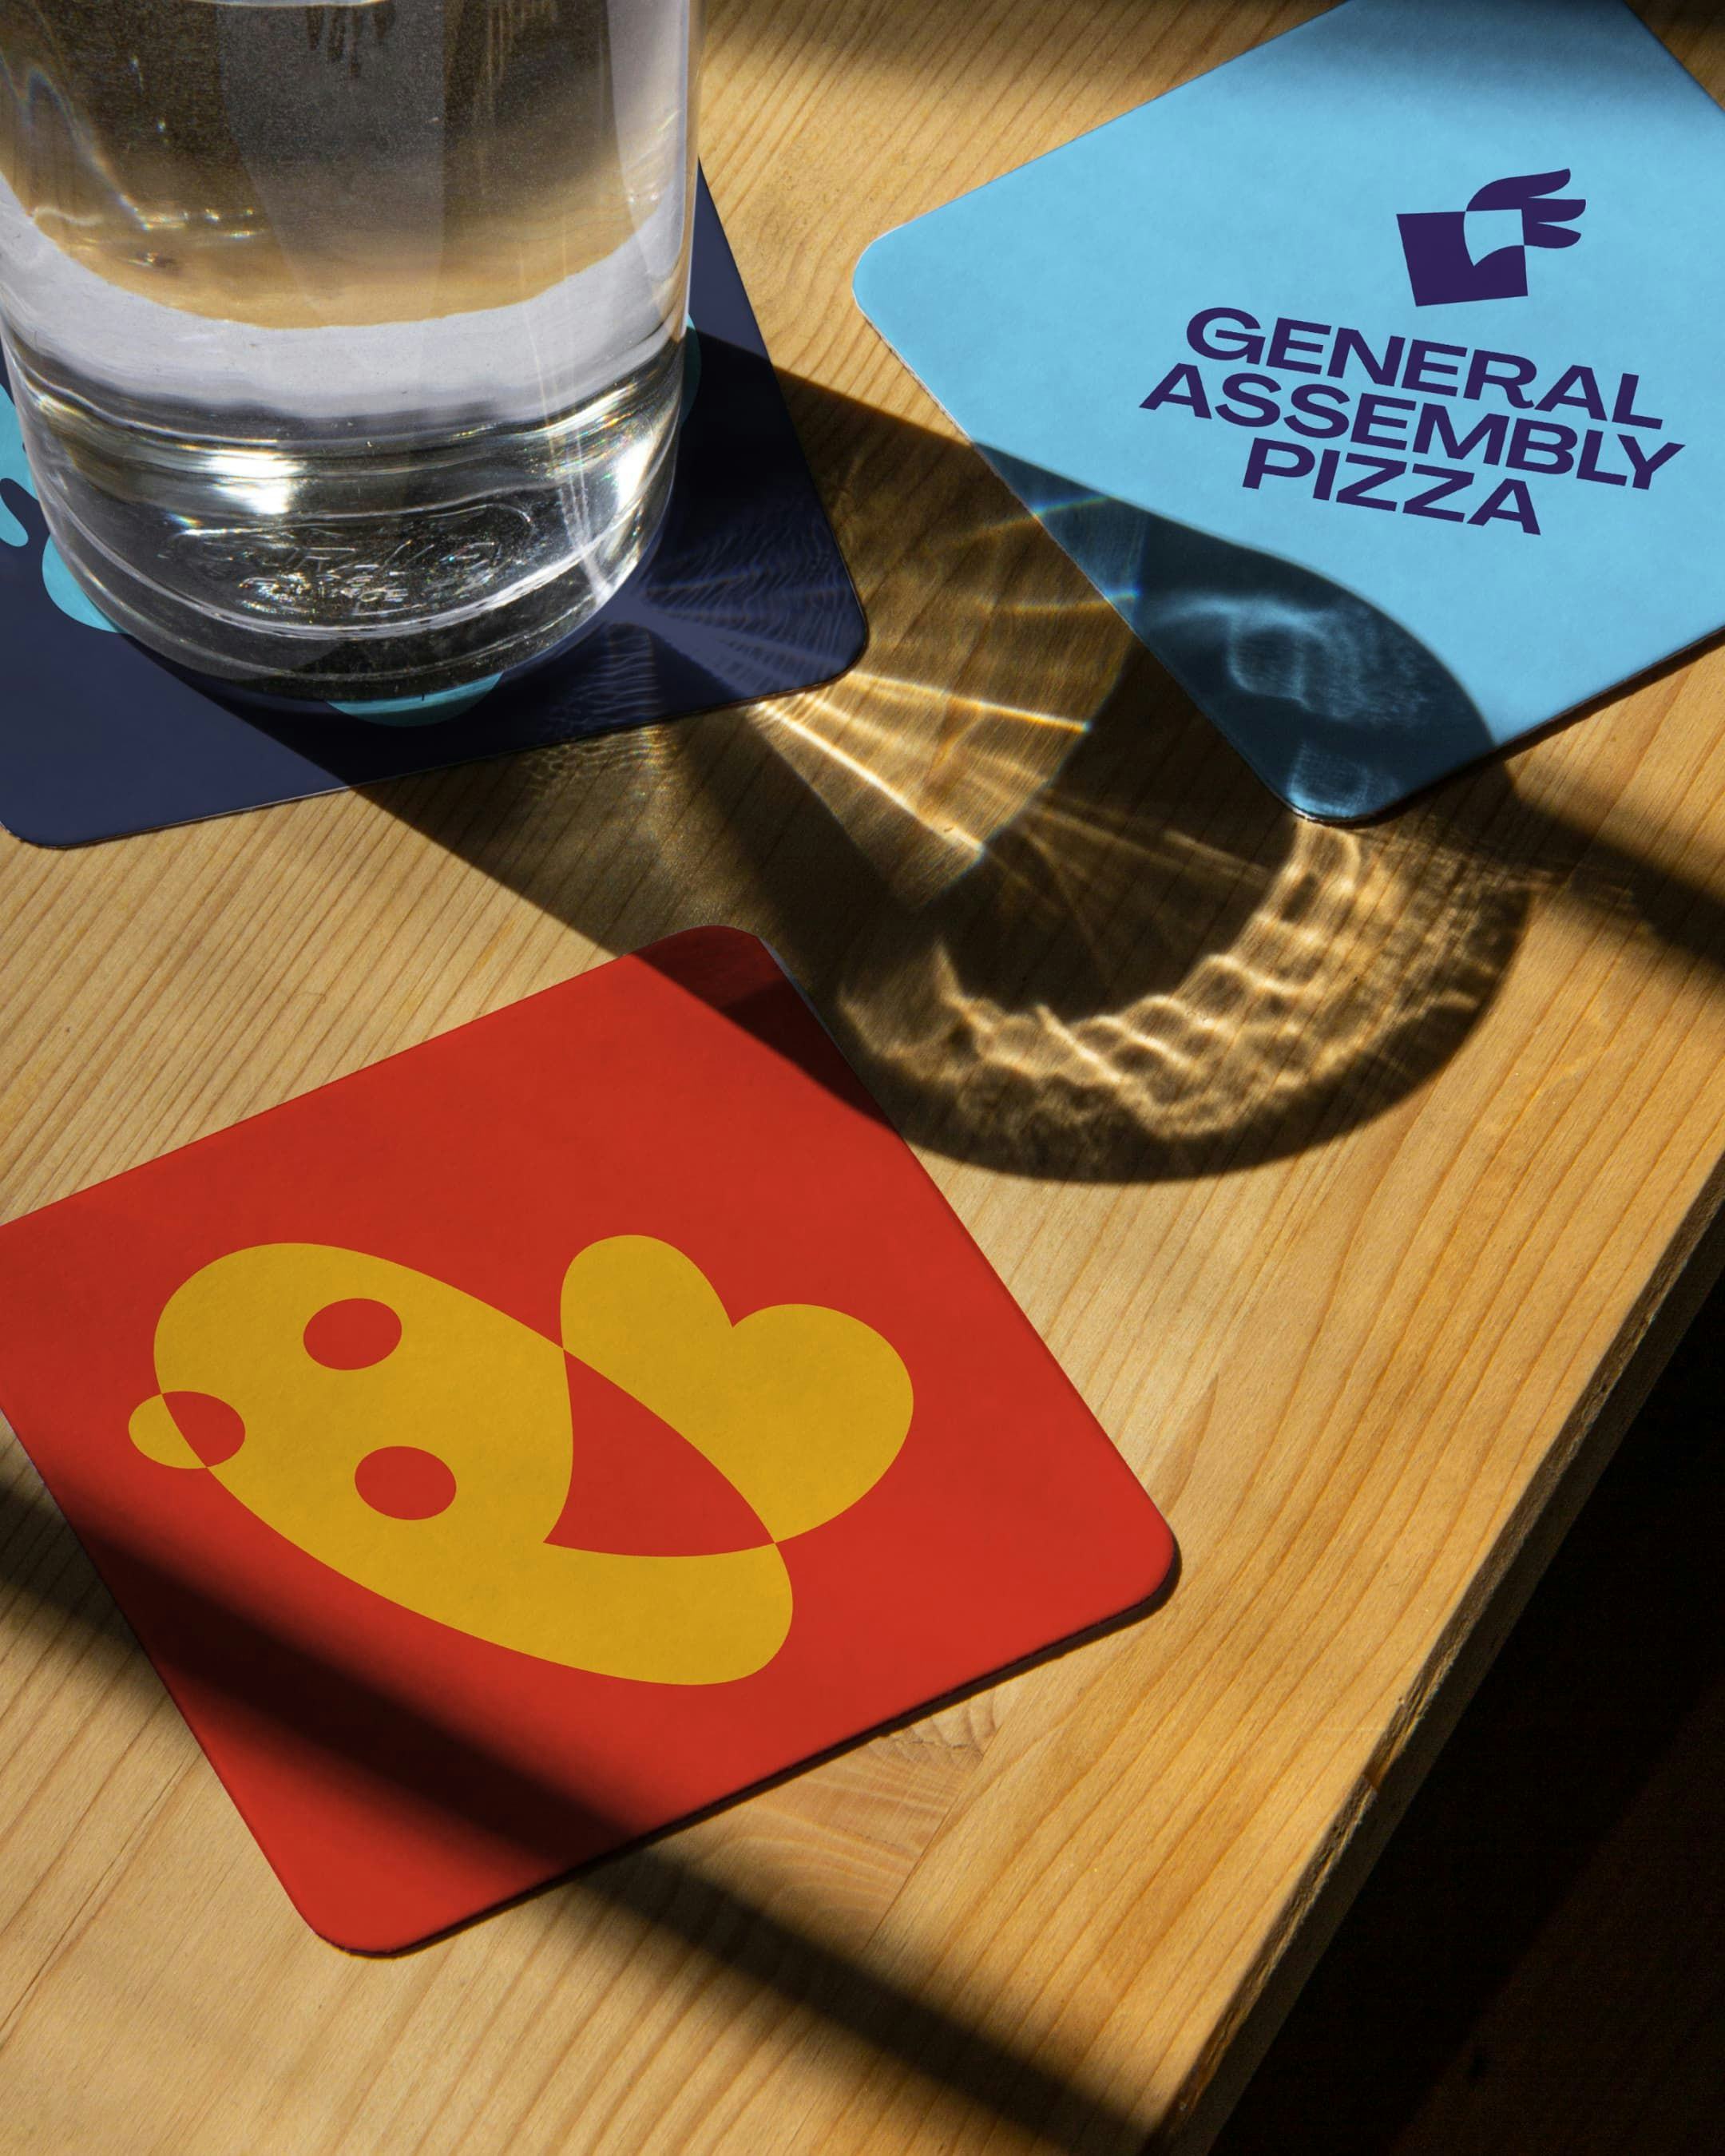 Coasters, Photography, art direction and content creation for General Assembly Pizza.